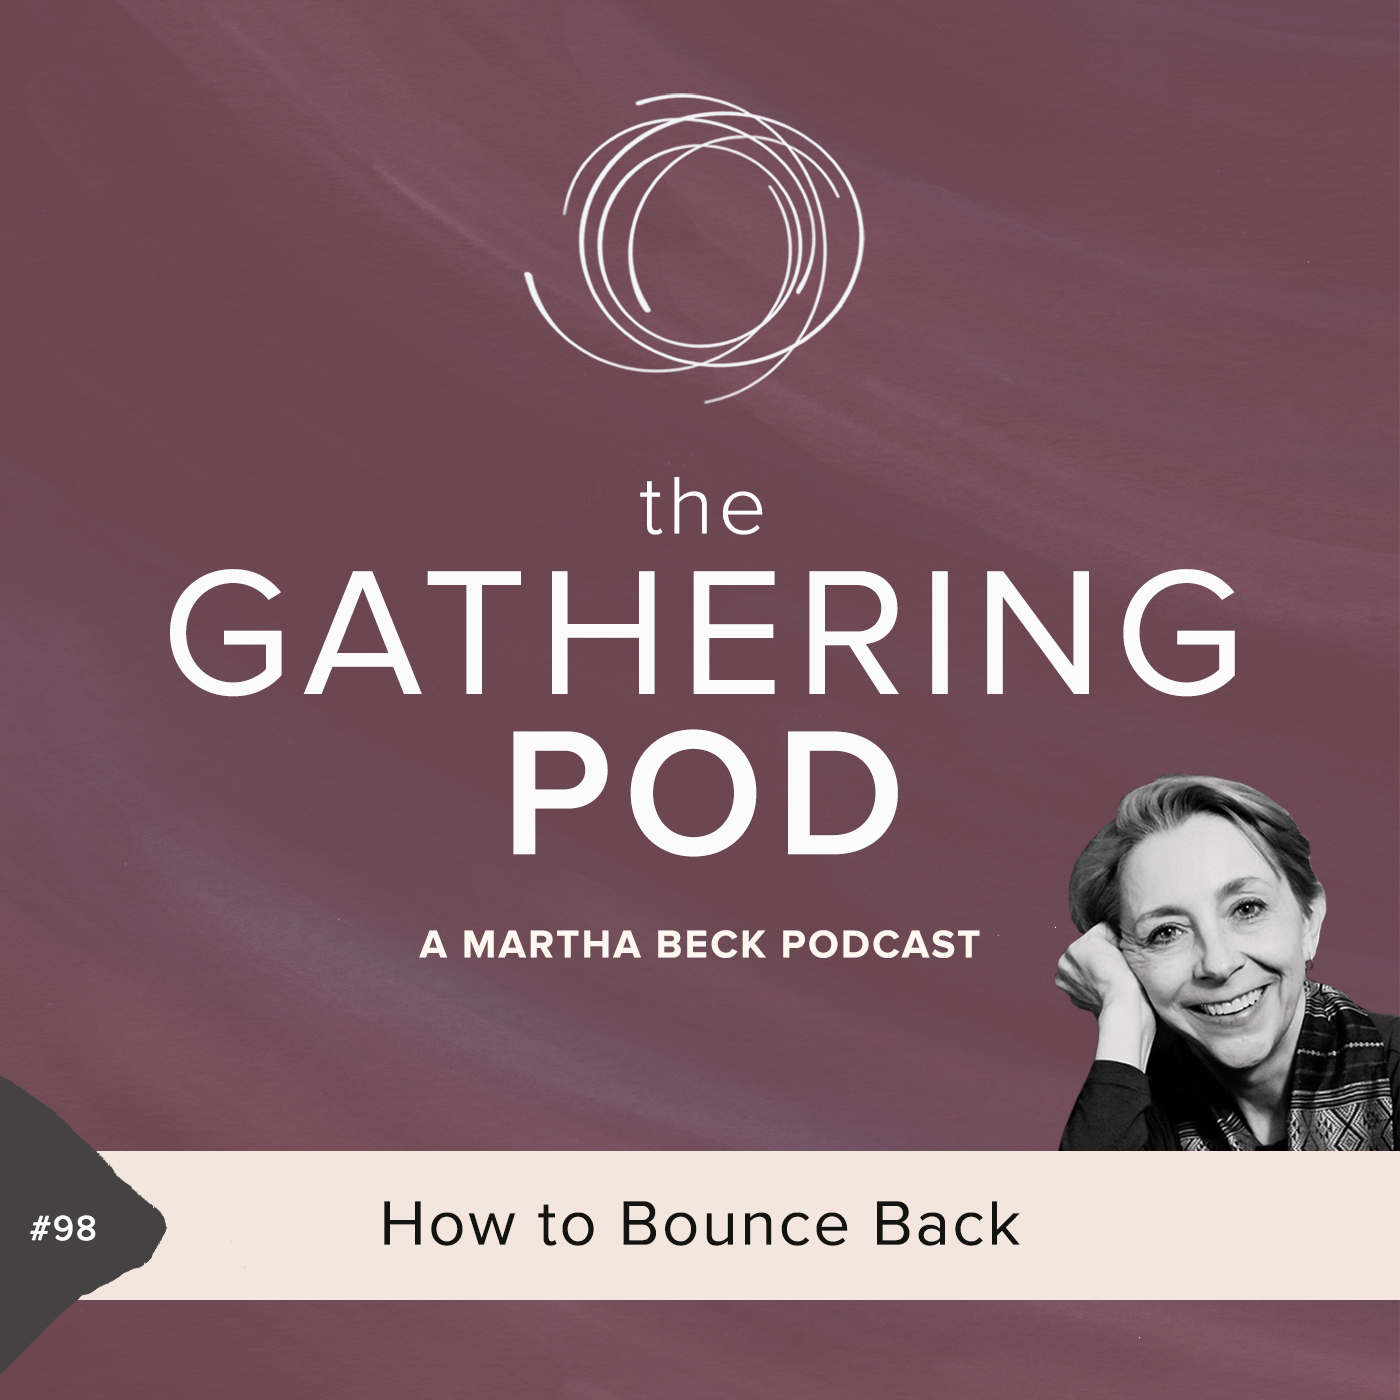 Image for The Gathering Pod A Martha Beck Podcast Episode #98 How to Bounce Back